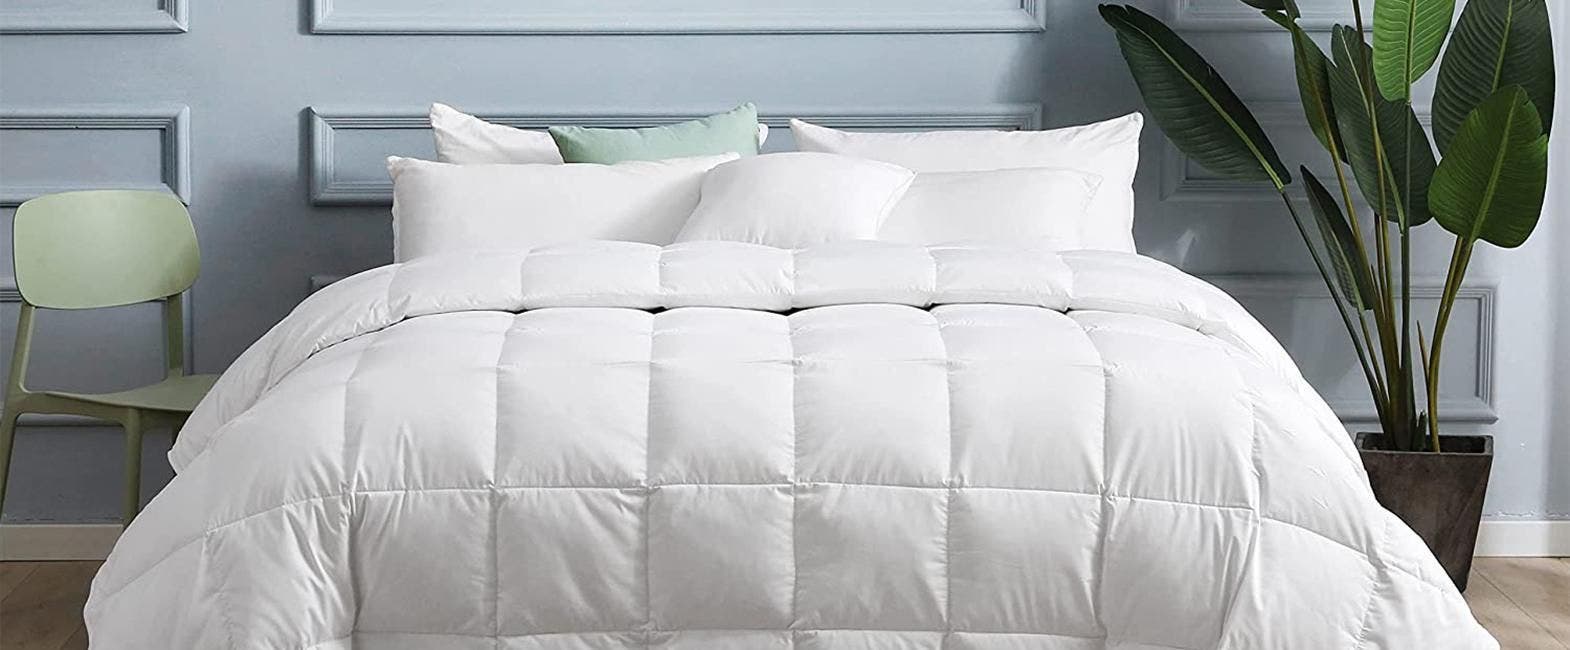 Mix and Match: Creating a Personalized Bedding Look